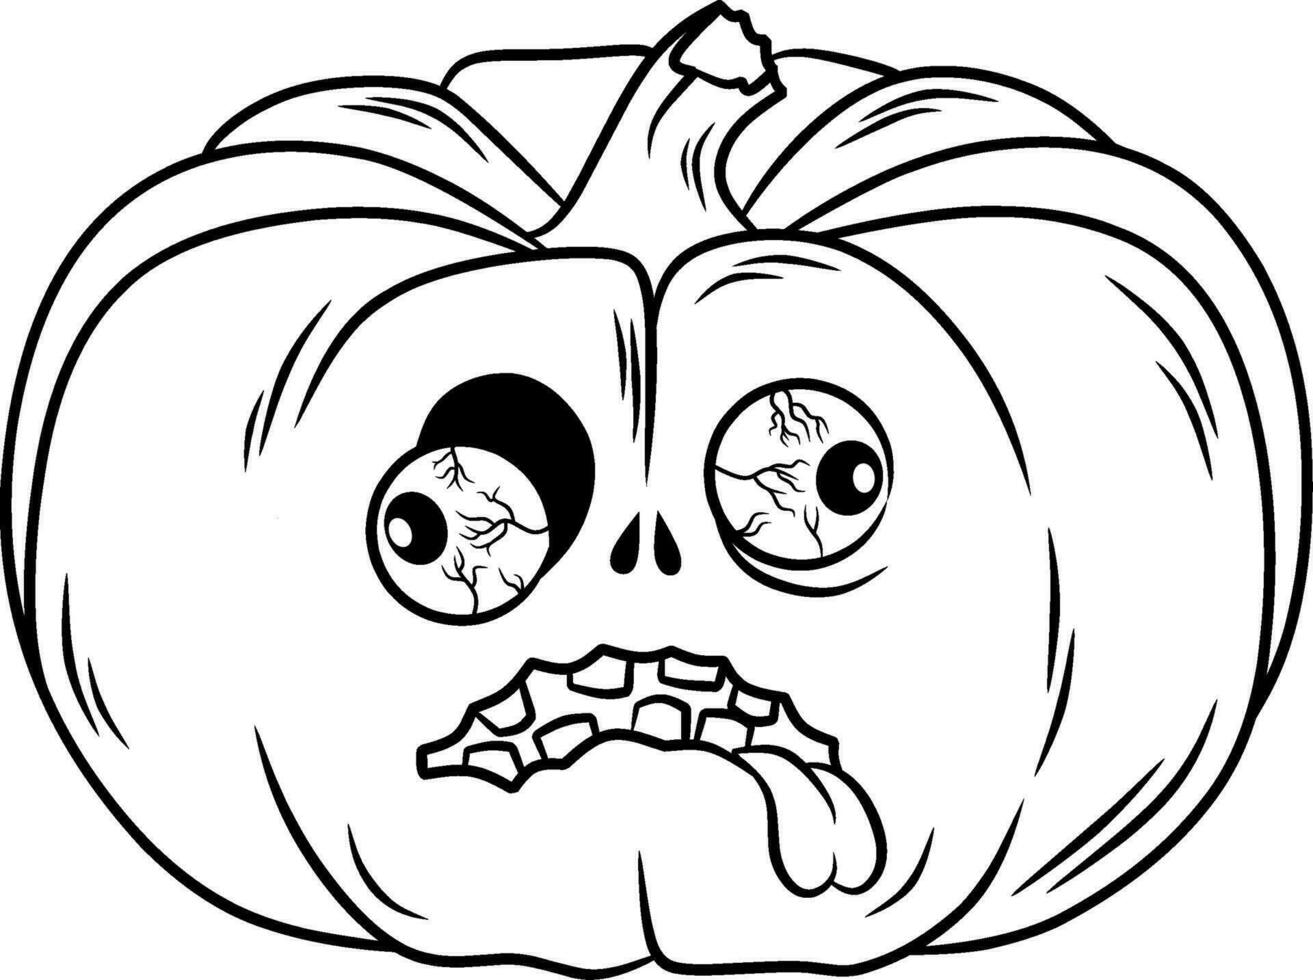 Evil pumpkin line art for coloring book page vector